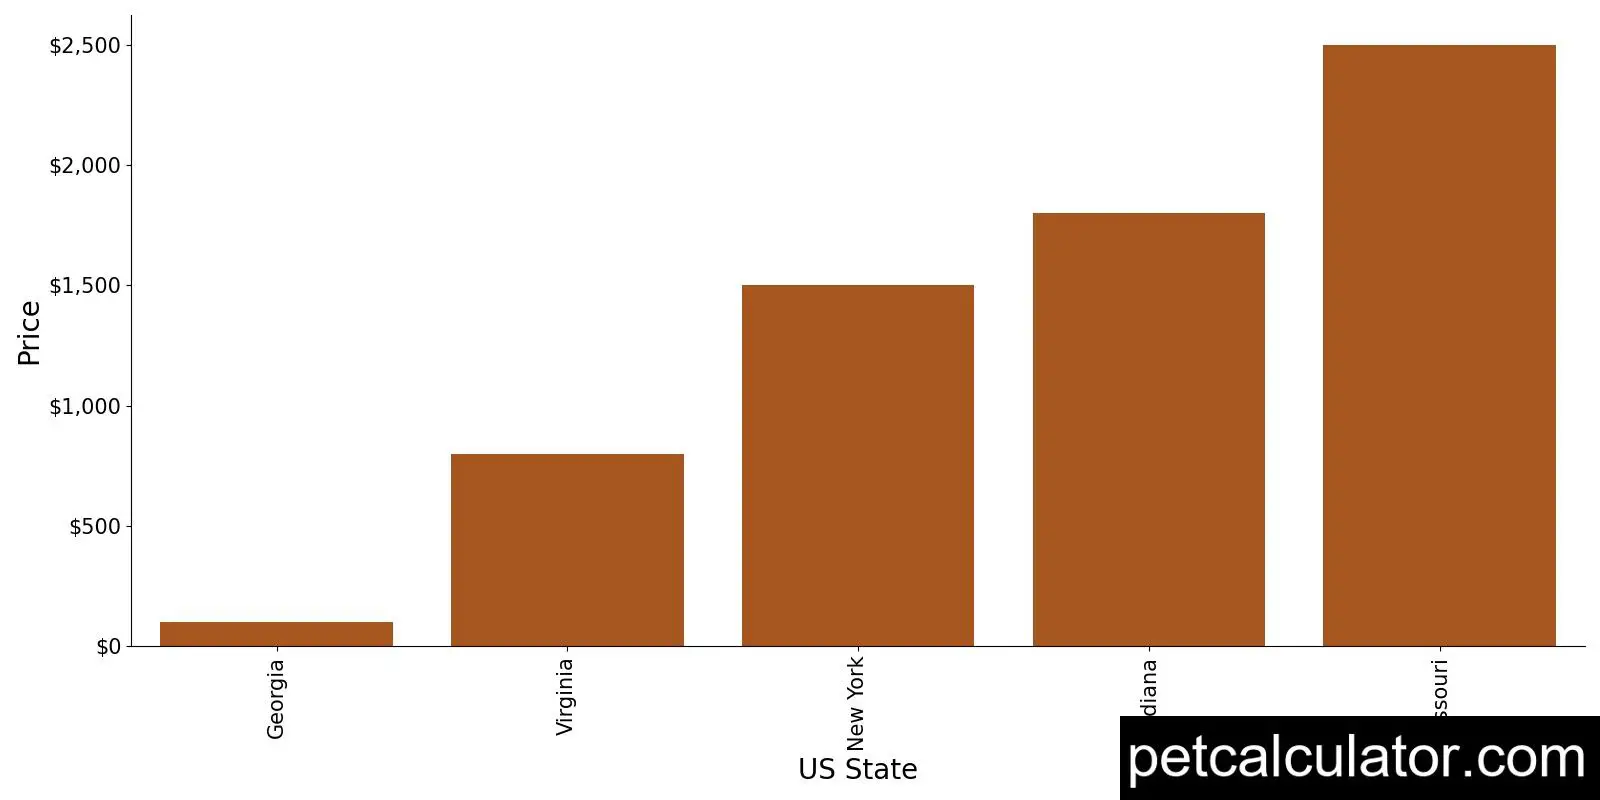 Price of Flat-Coated Retriever by US State 